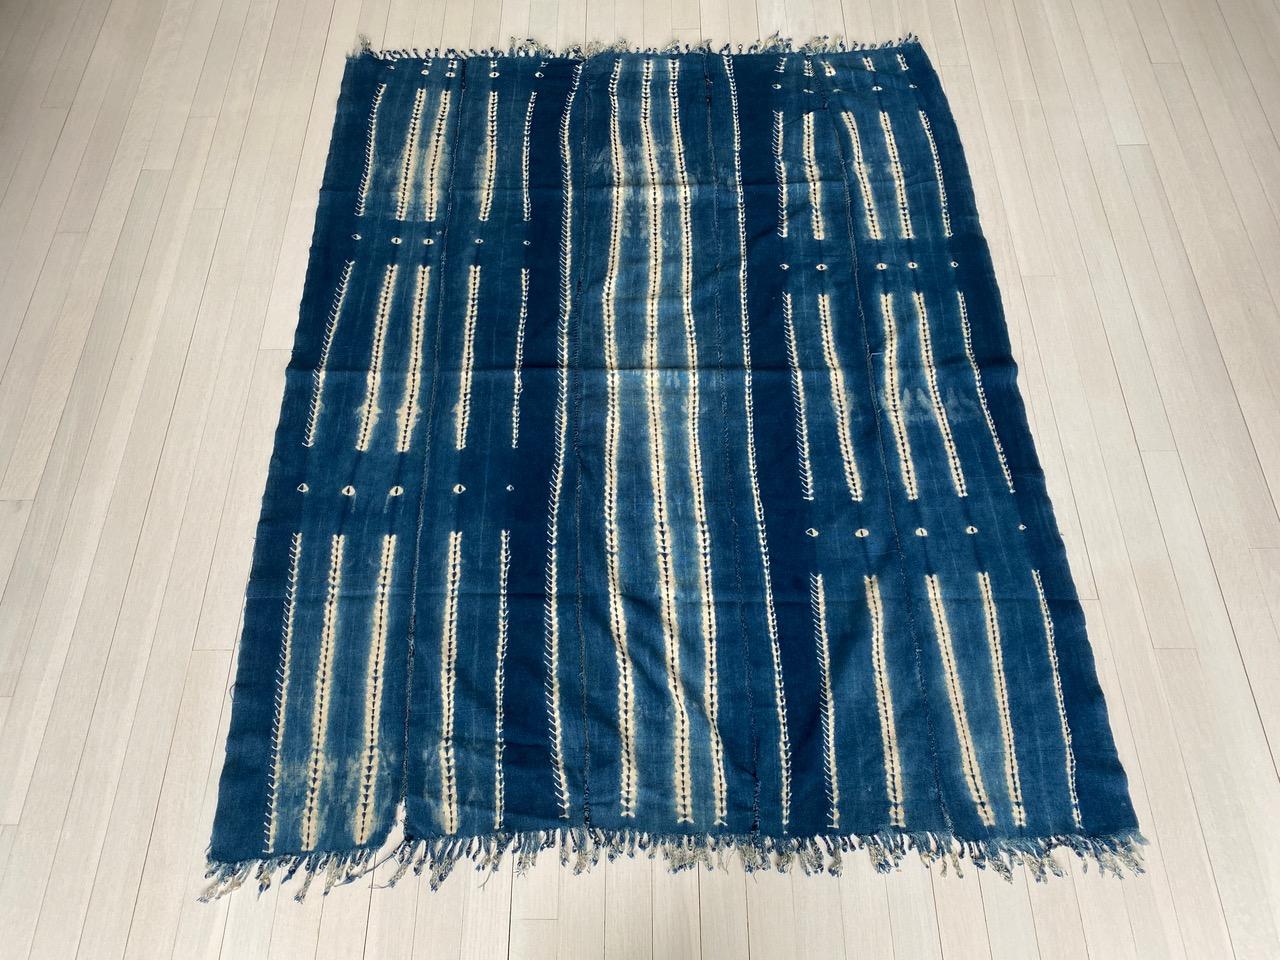 African Mali indigo textile circa 1950. Handwoven, vegetable dyed cotton. We only select the best.

This soft textile was sourced in the spirit of Wabi-Sabi, a Japanese philosophy that beauty can be found in imperfection and impermanence. It is a